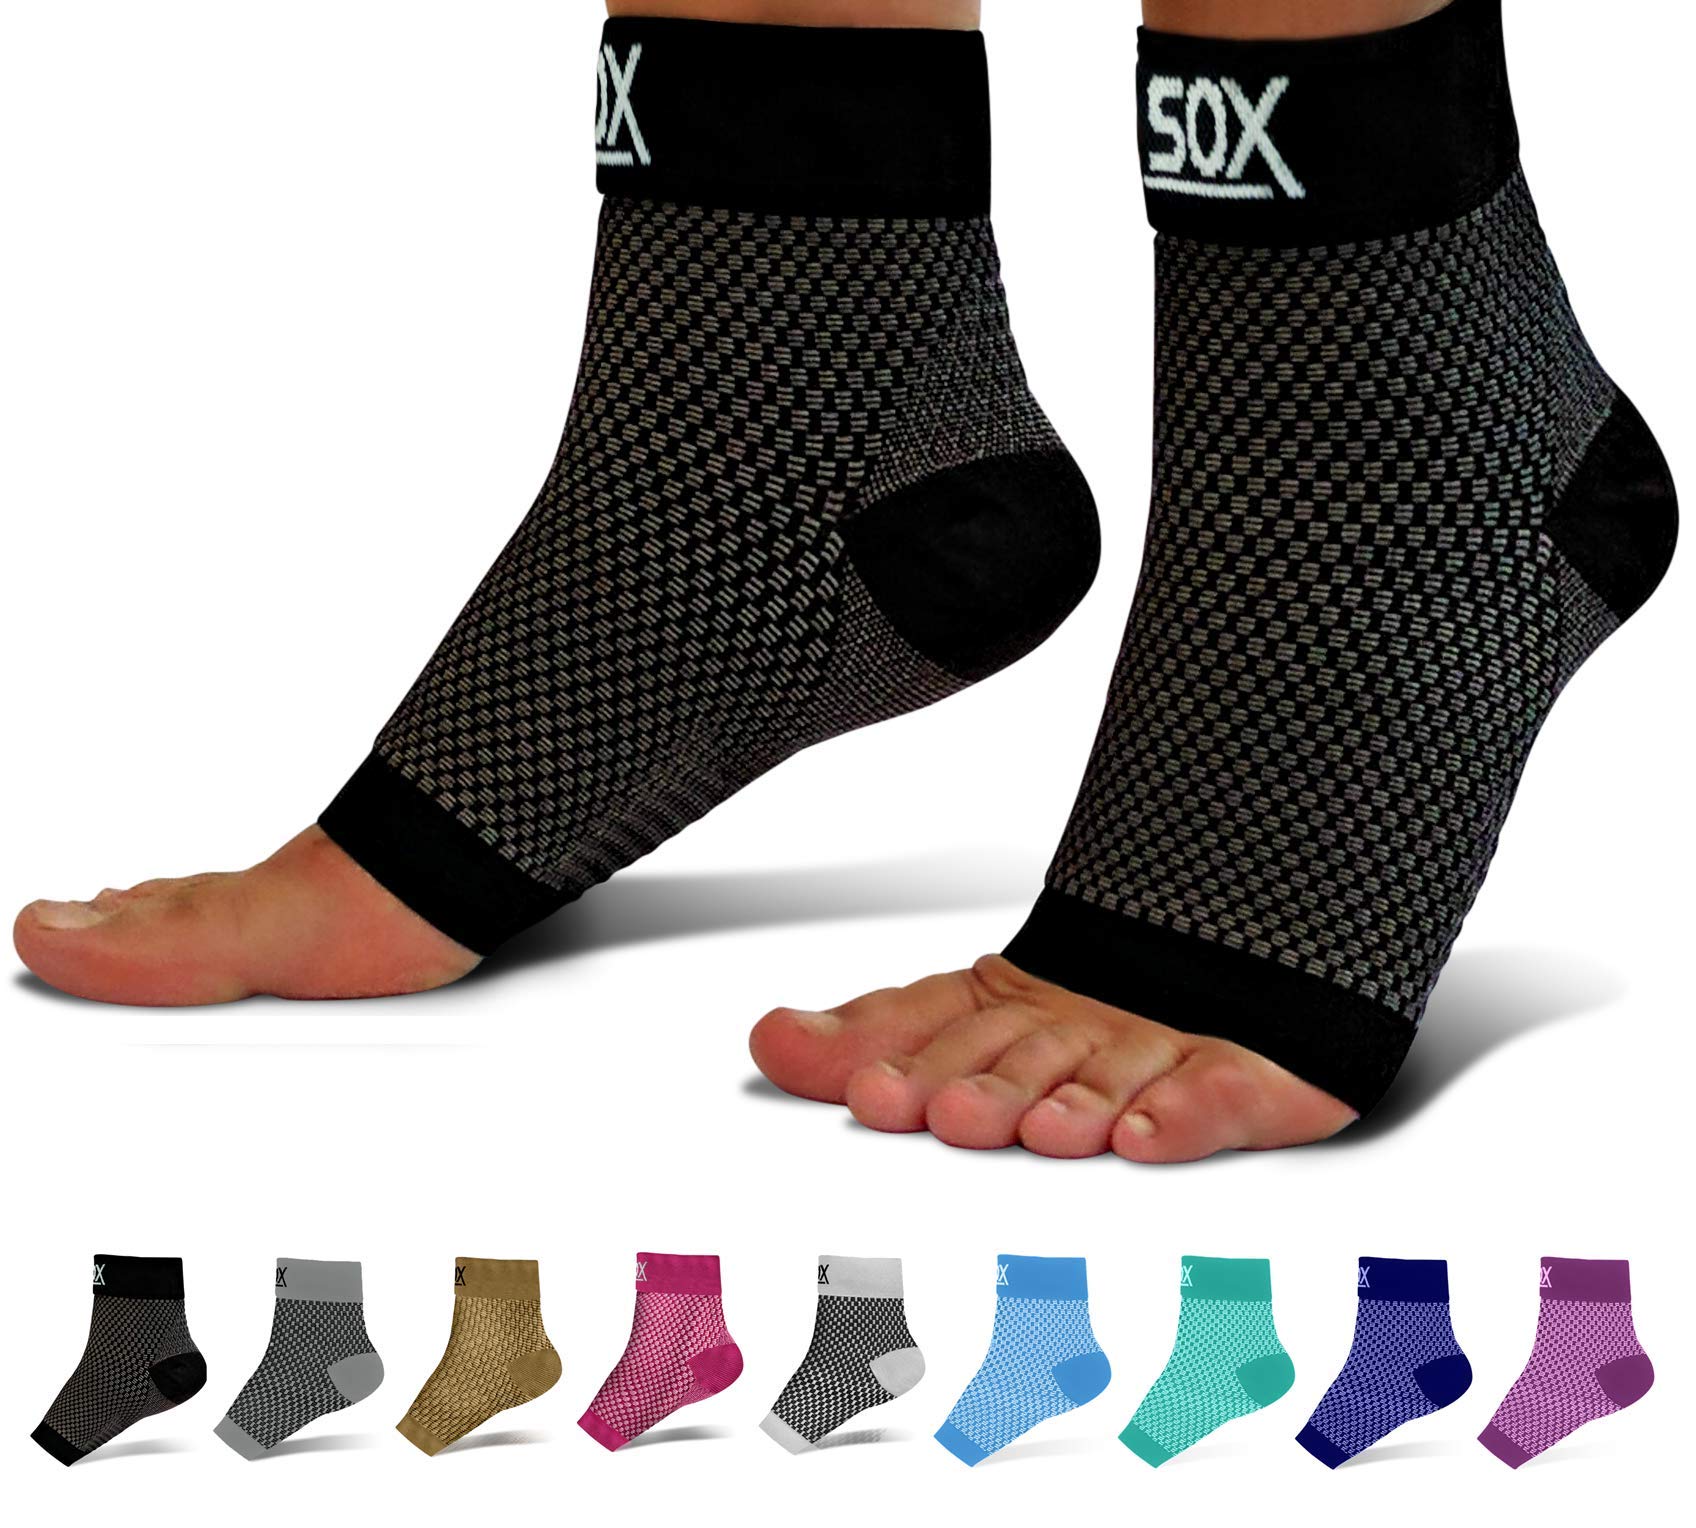 Book Cover SB SOX Plantar Fasciitis Relief Socks (1 Pair) for Women & Men - Best Compression Sleeves for All Day Wear with Foot/Arch Support for Pain Relief (Black, Medium) Black Medium